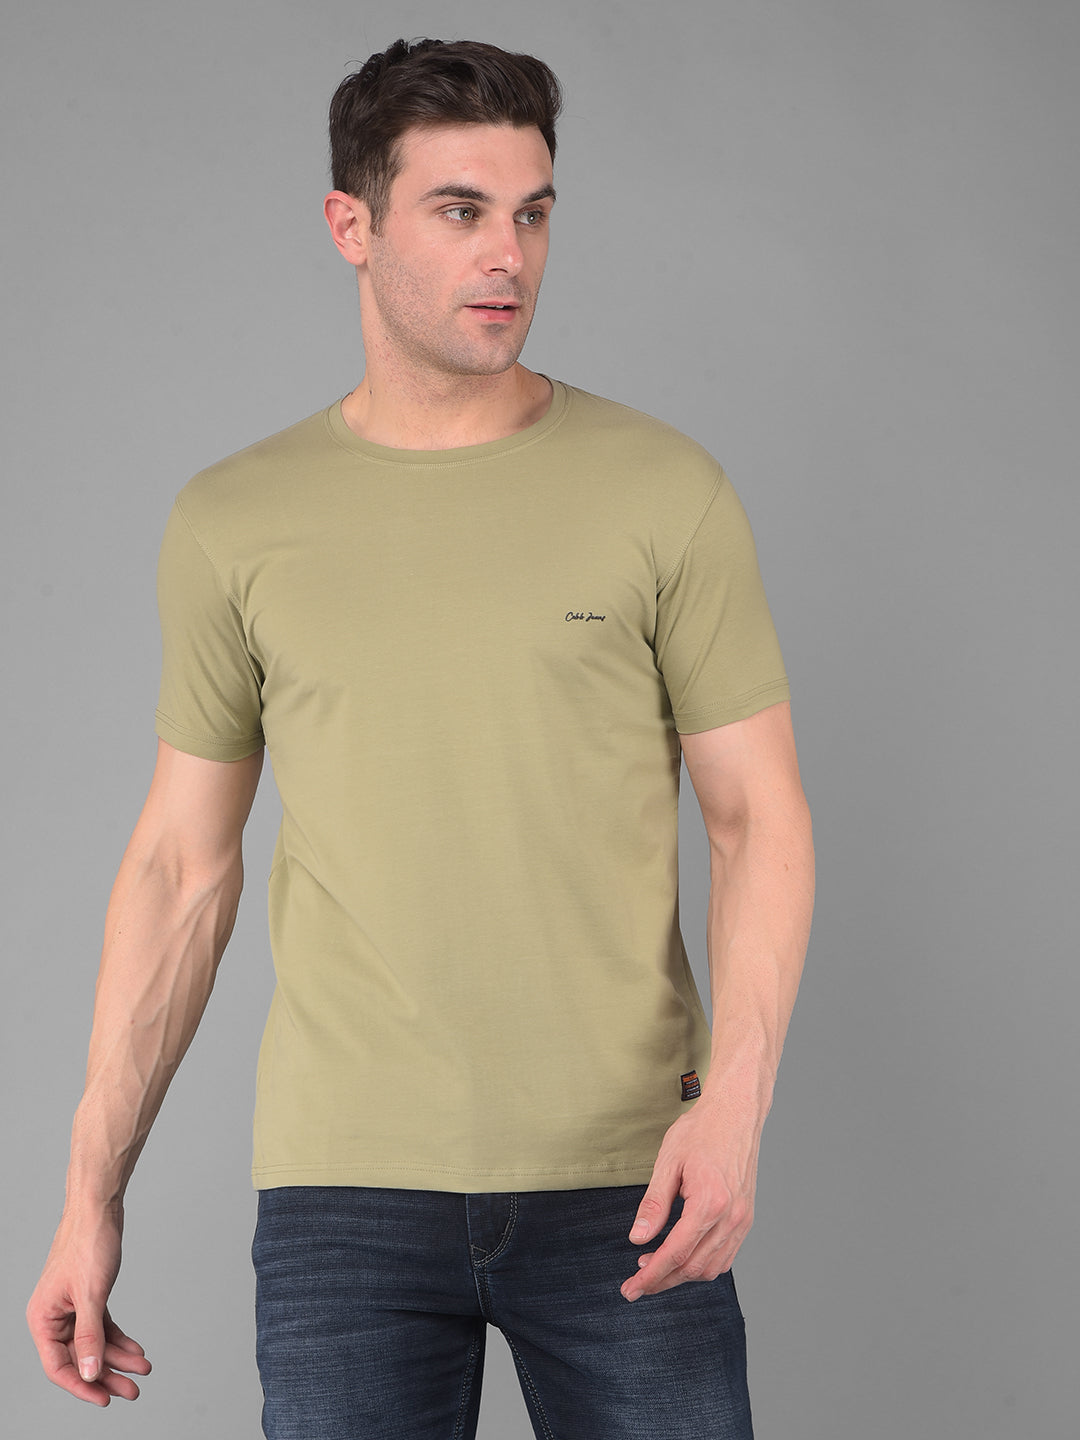 cobb solid olive green round neck t-shirt